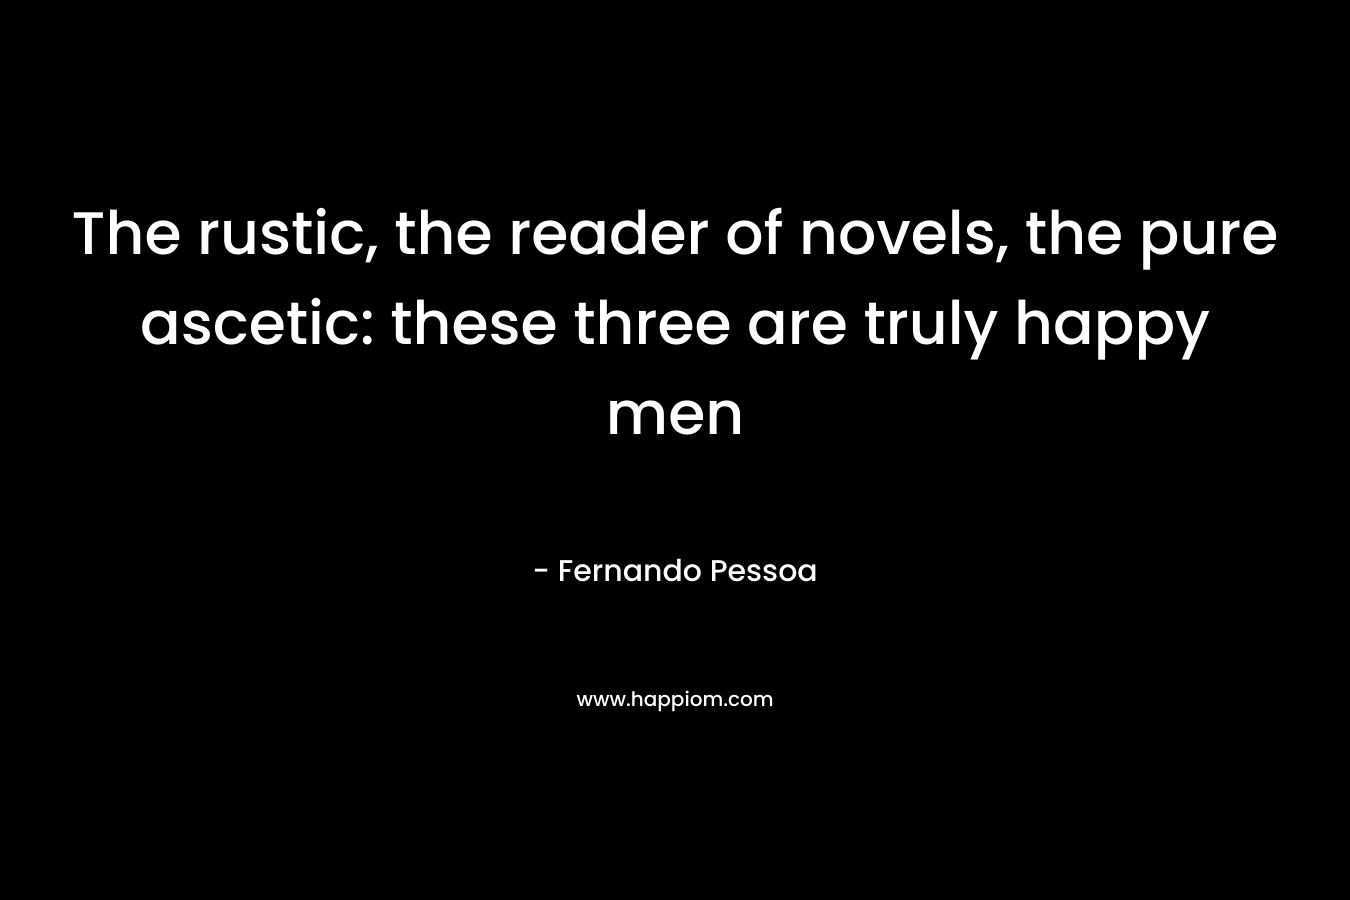 The rustic, the reader of novels, the pure ascetic: these three are truly happy men